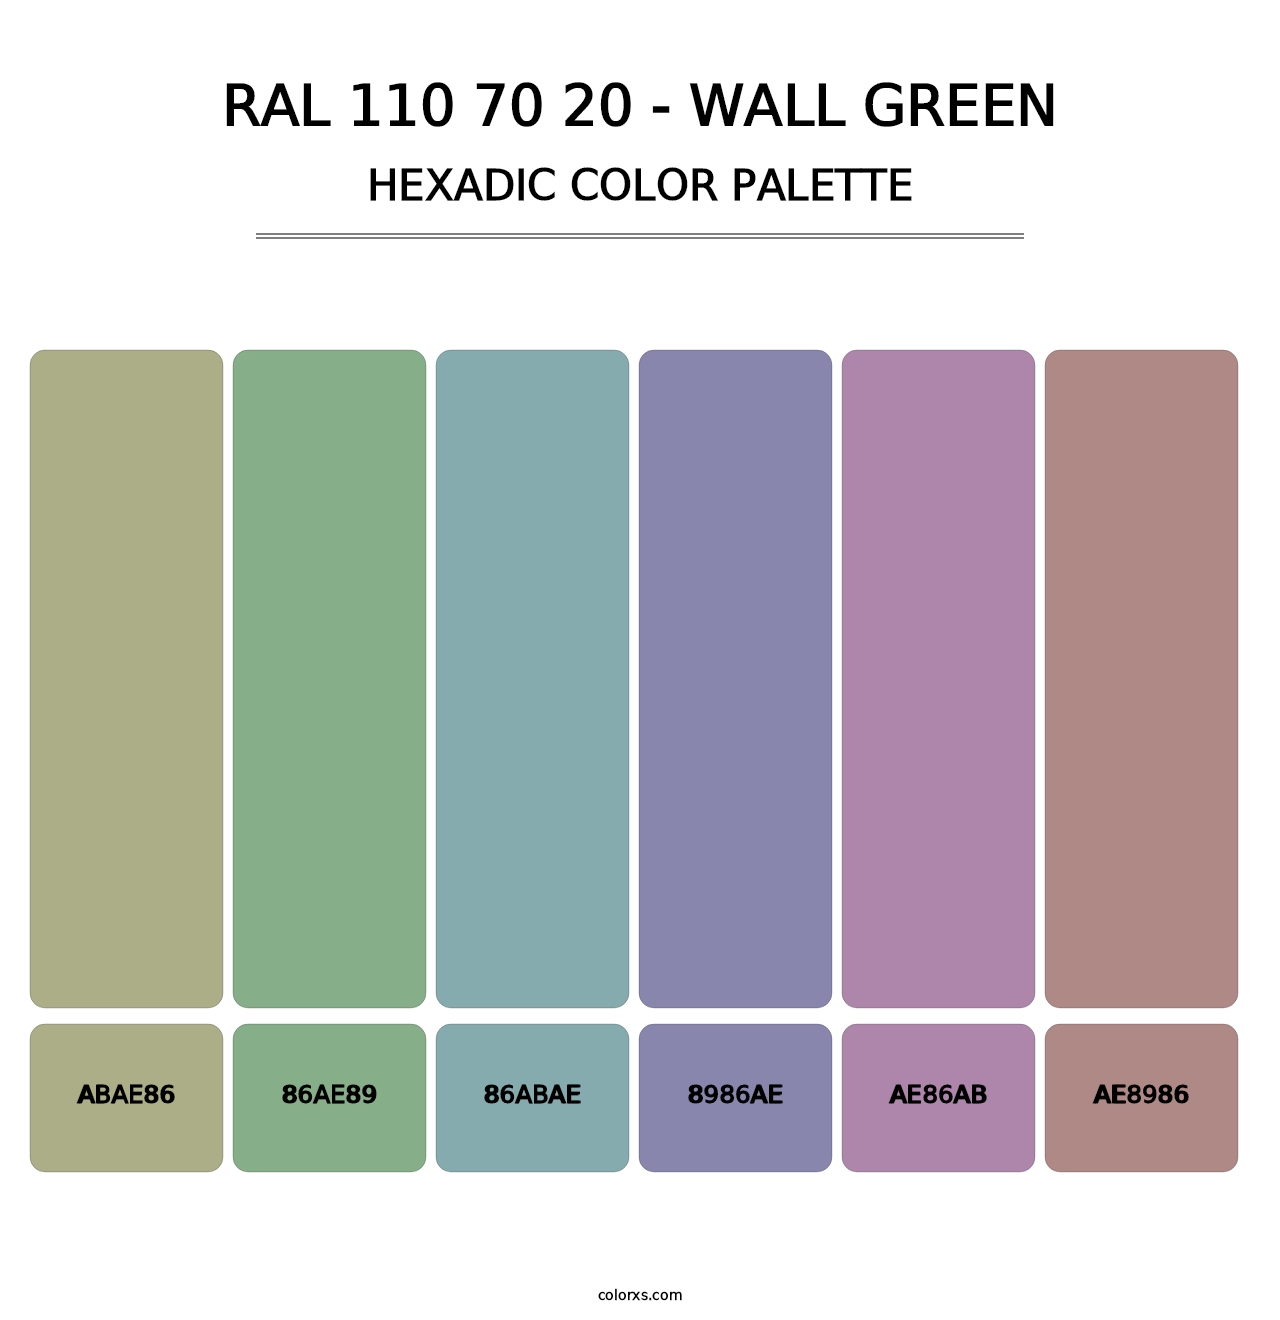 RAL 110 70 20 - Wall Green - Hexadic Color Palette